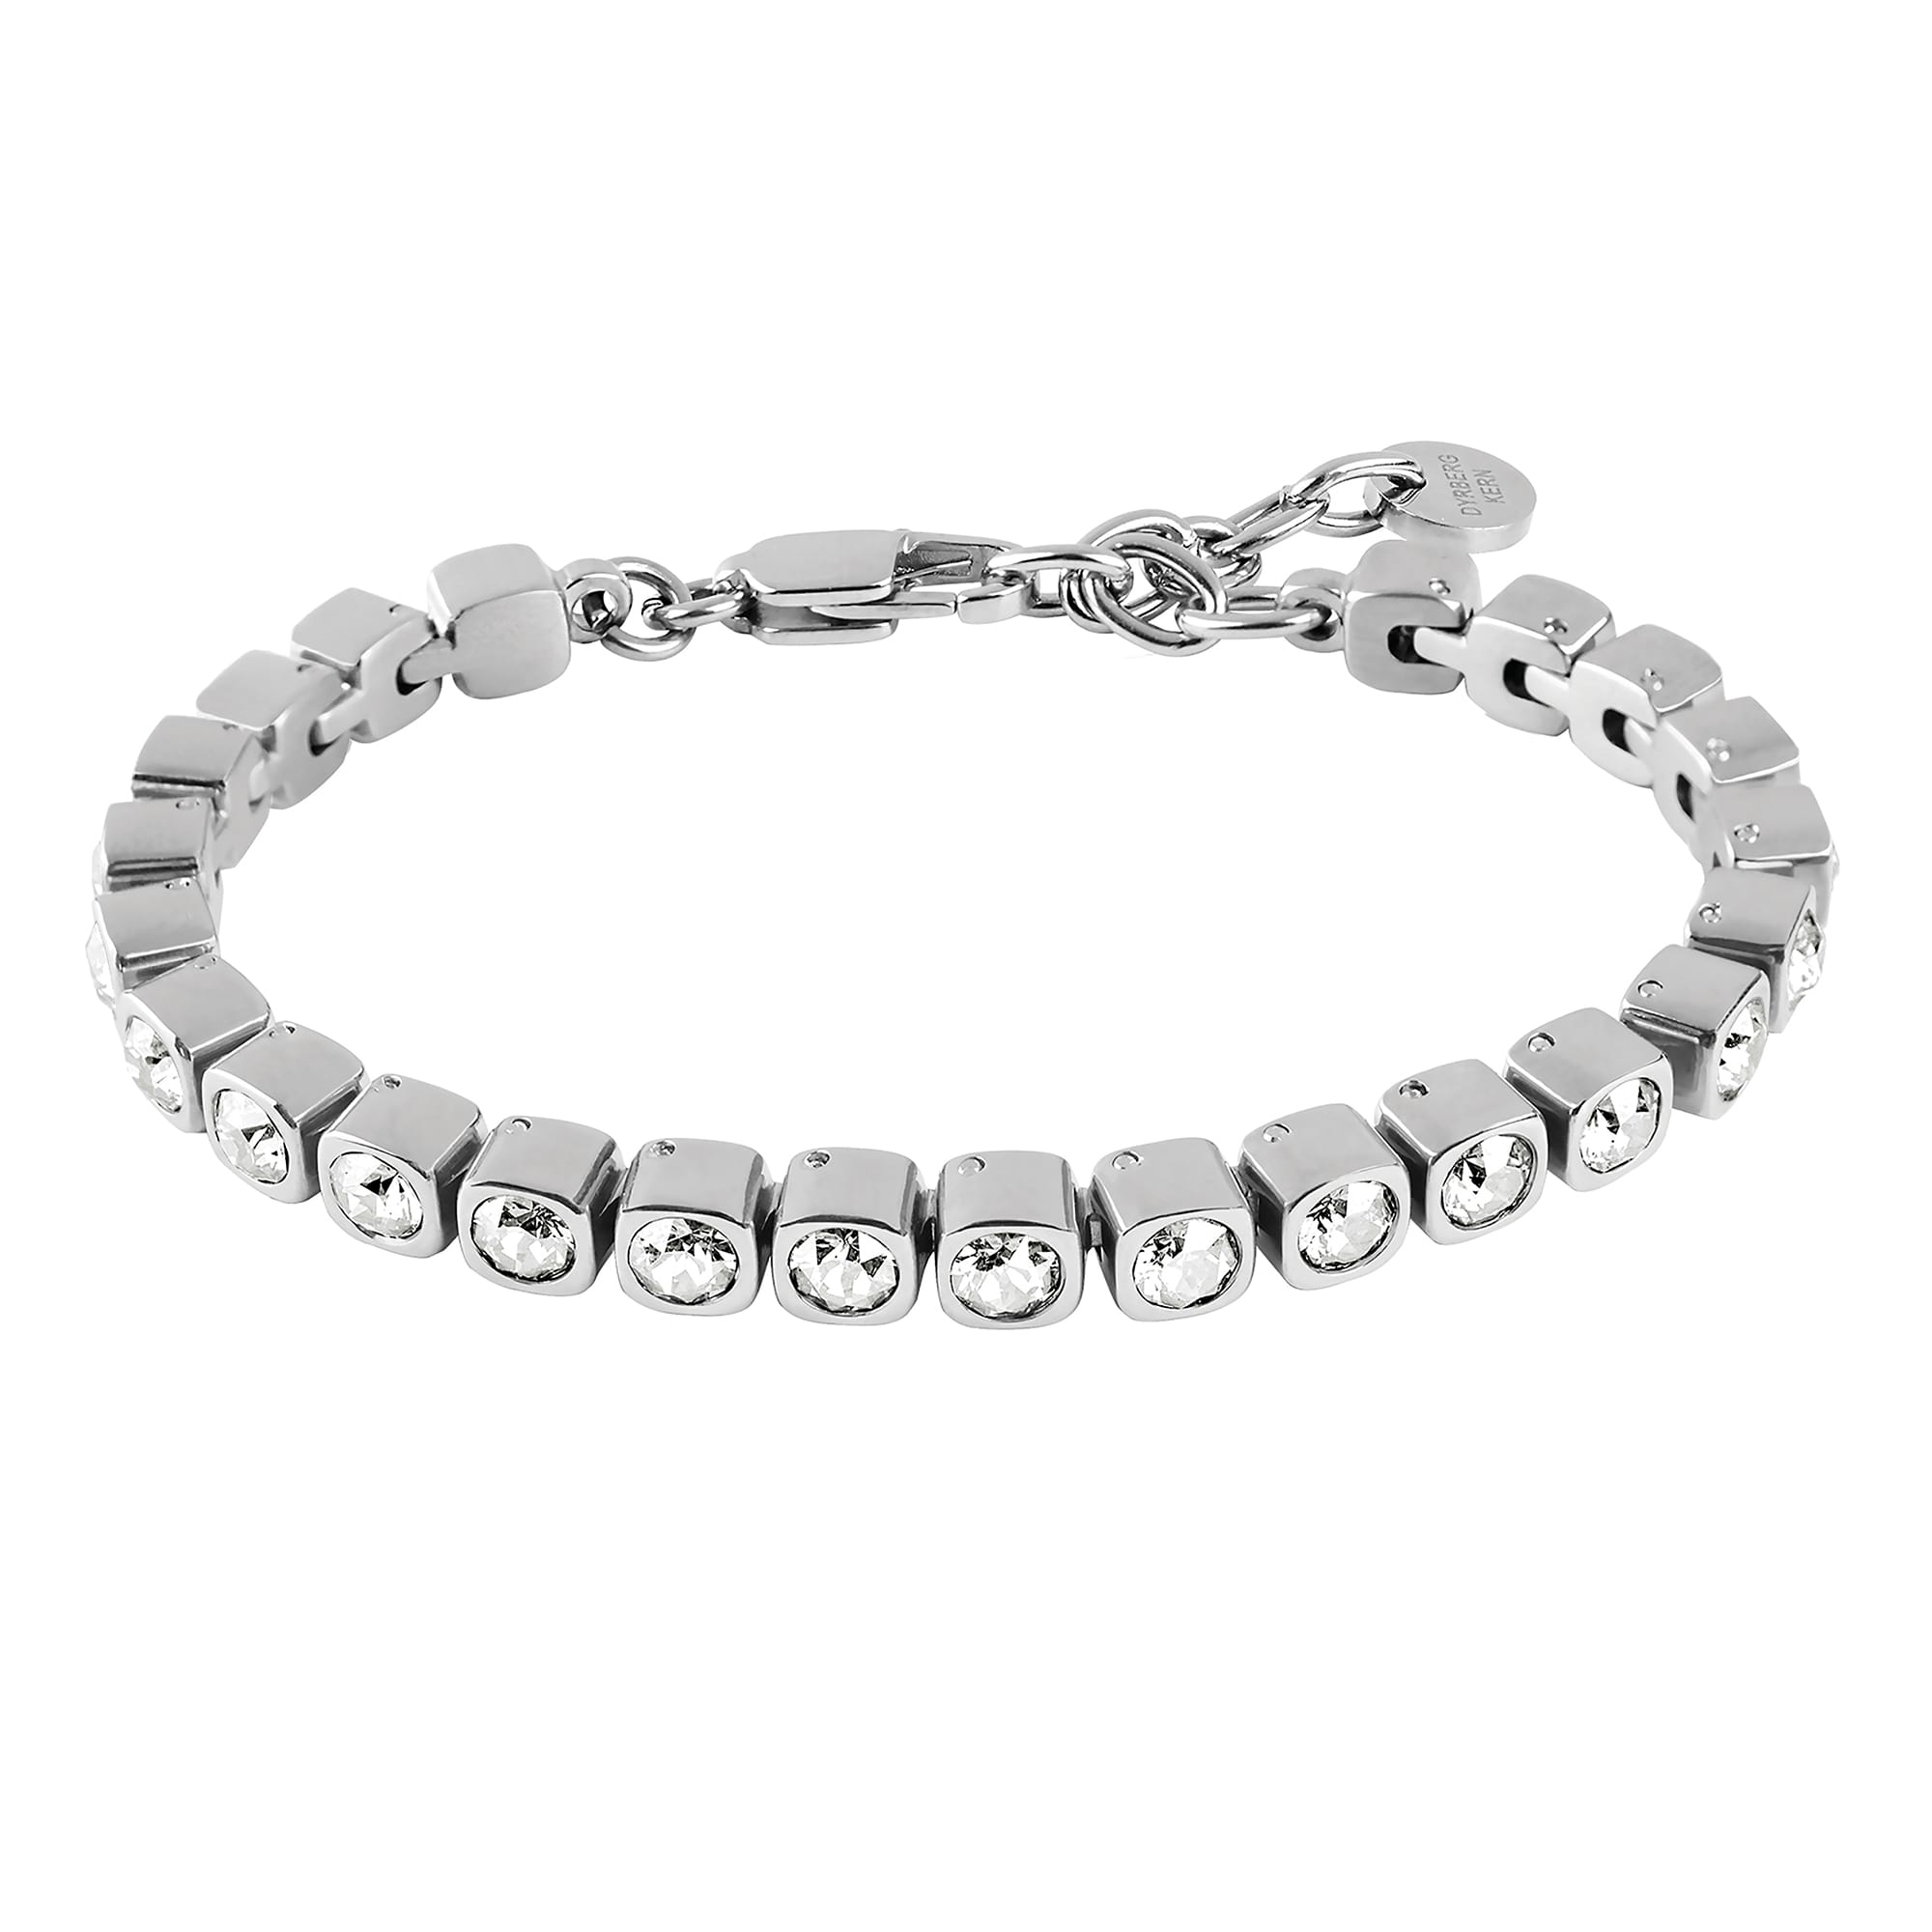 CORY Bracelet With Clear Crystals Silver - Allure Online Shop